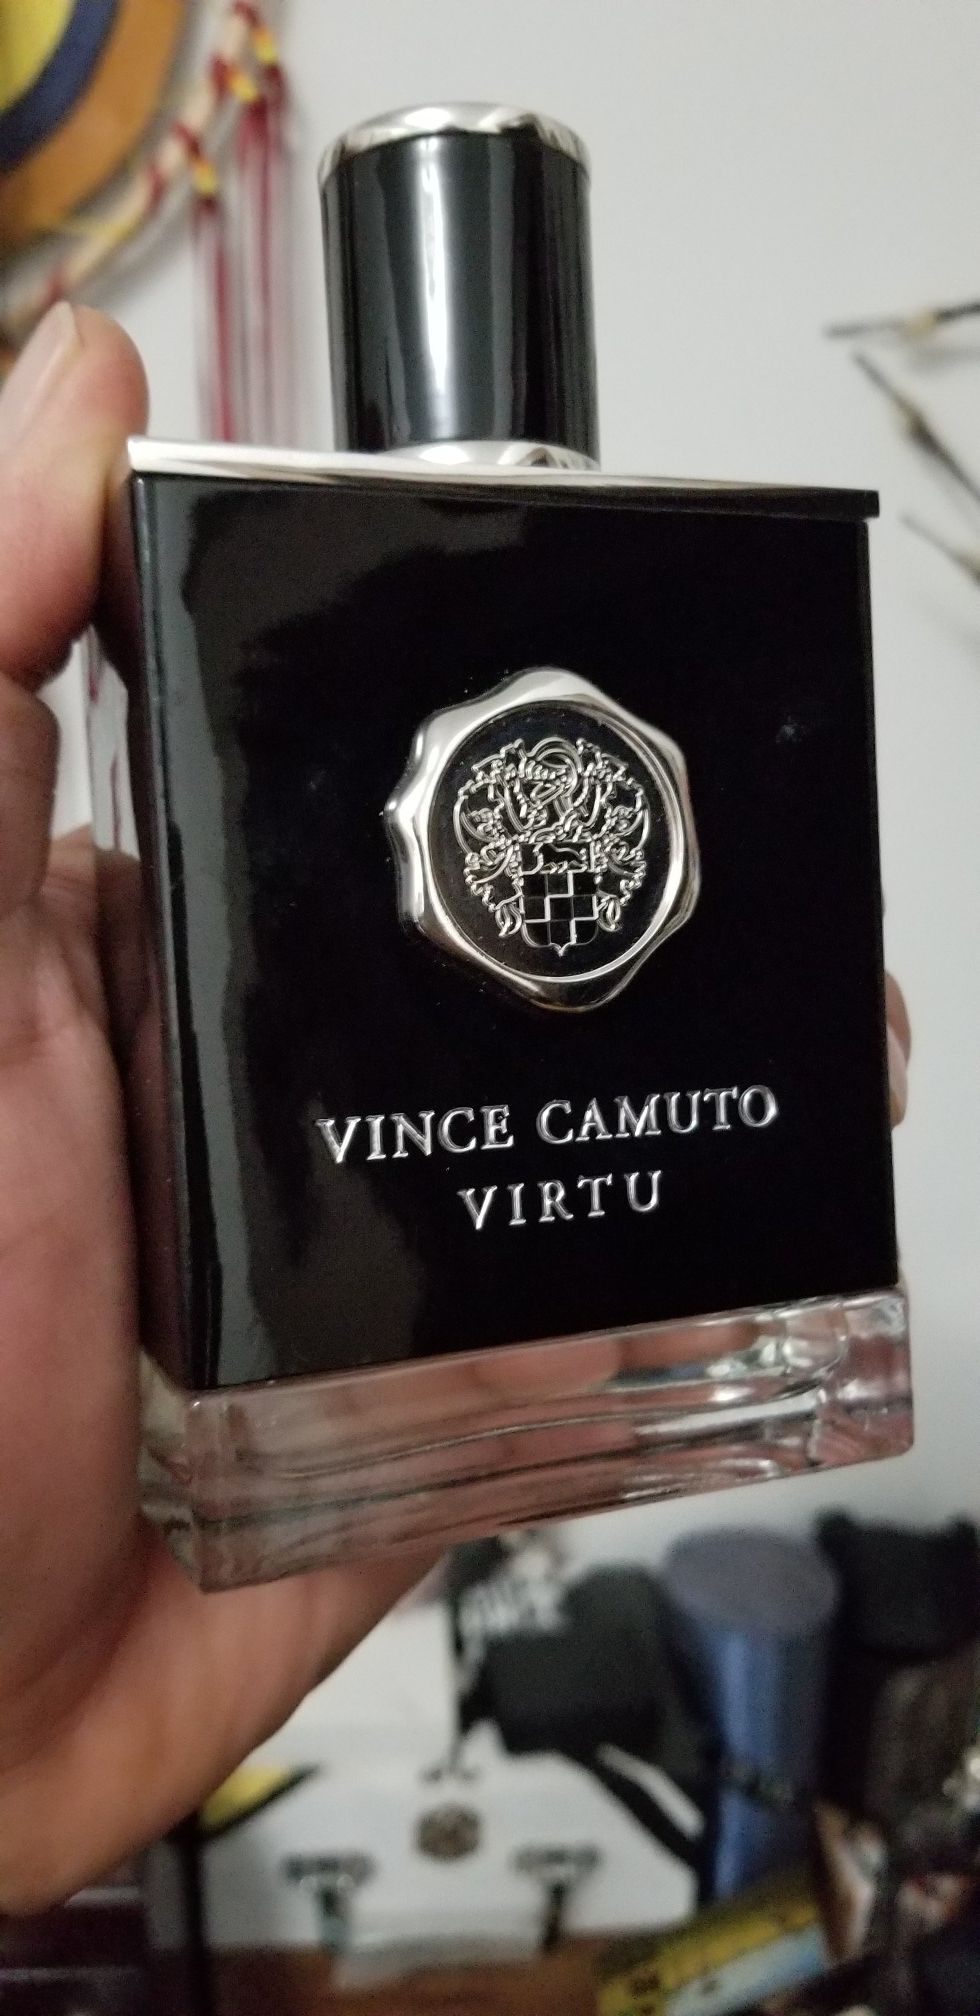 Vince Camuto Virtu Mens Cologne 3.4 oz EDT for Sale in Albuquerque, NM -  OfferUp